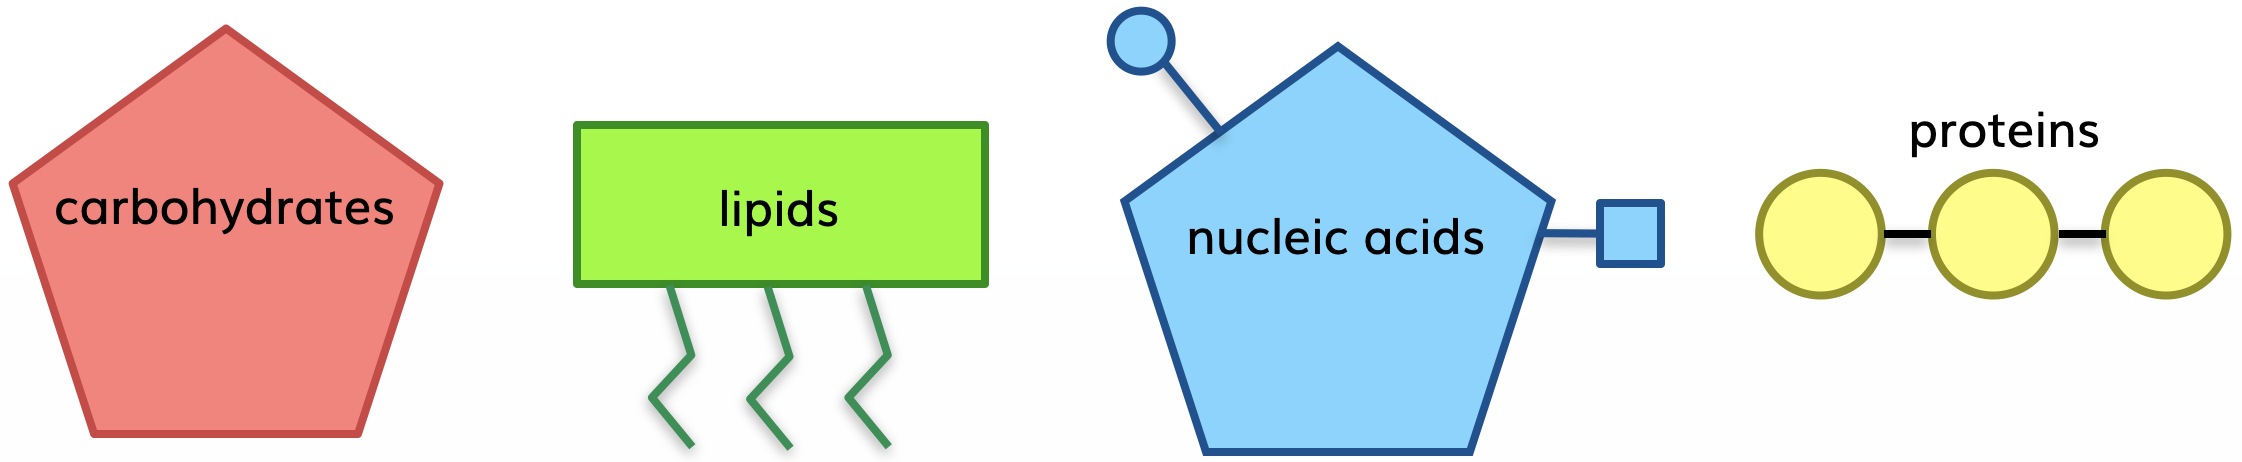 The four major biomolecules: Carbohydrates, Lipids, Nucleic Acids, and Proteins